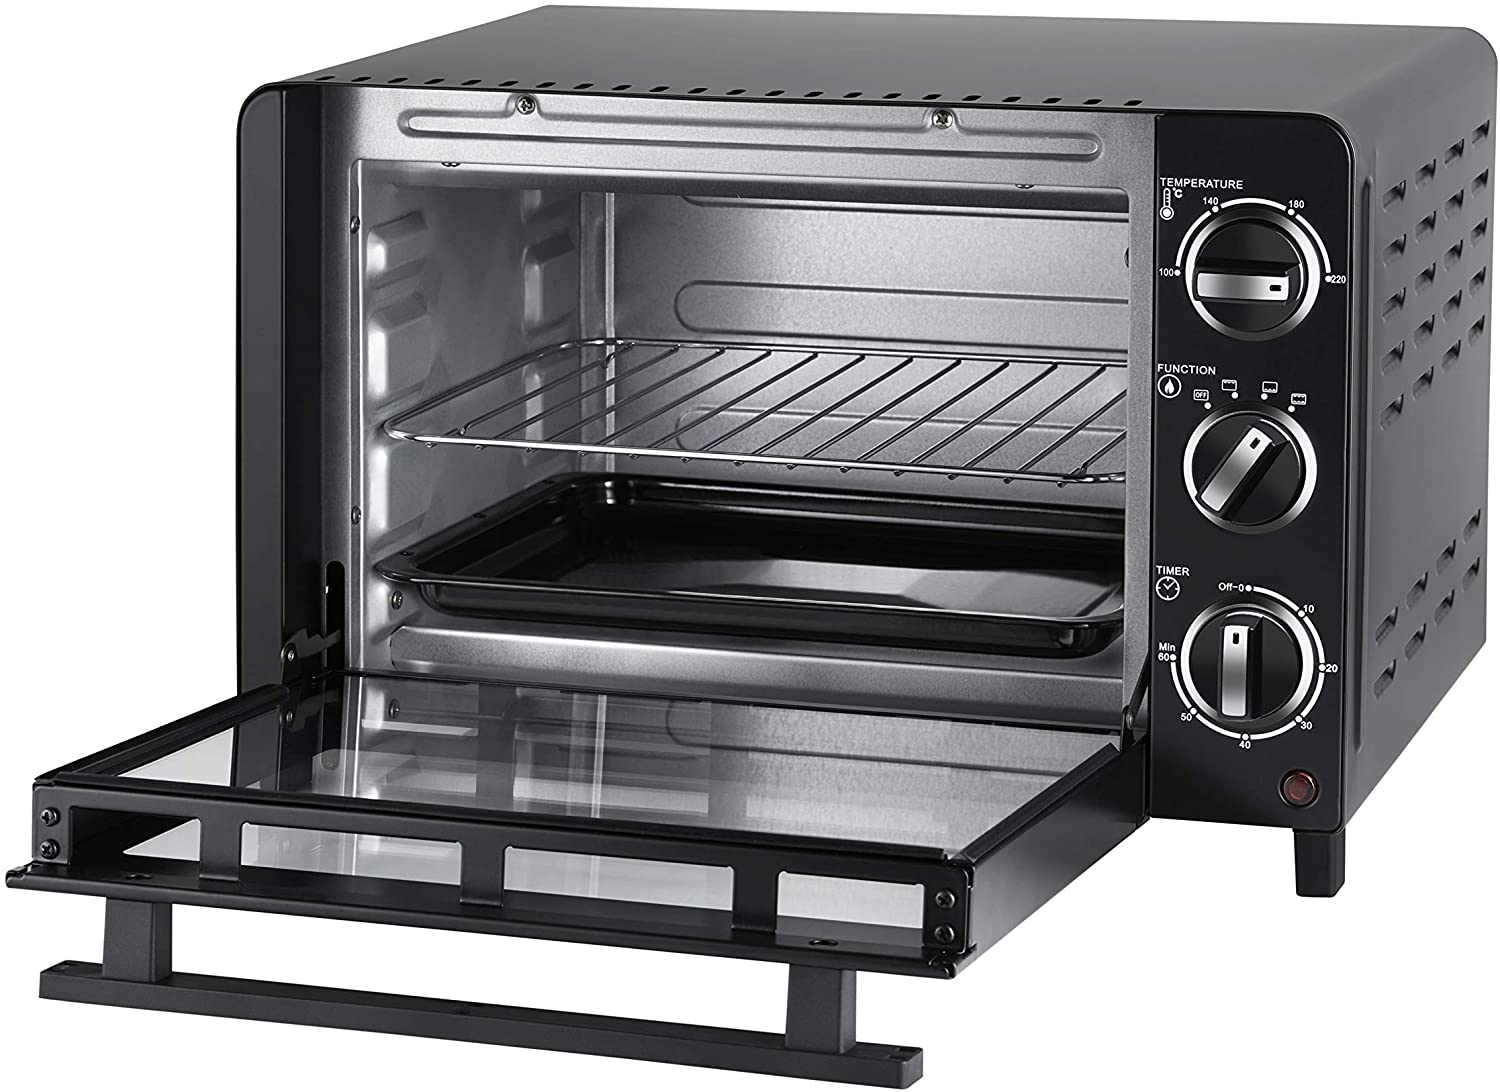 UNOLD 68875 Oven Allround, 1200 W, 18 L Volume, 4 Stainless Steel Heating Elements, with Double Glazed Door, 1200, Metal, 18 Litres, Black